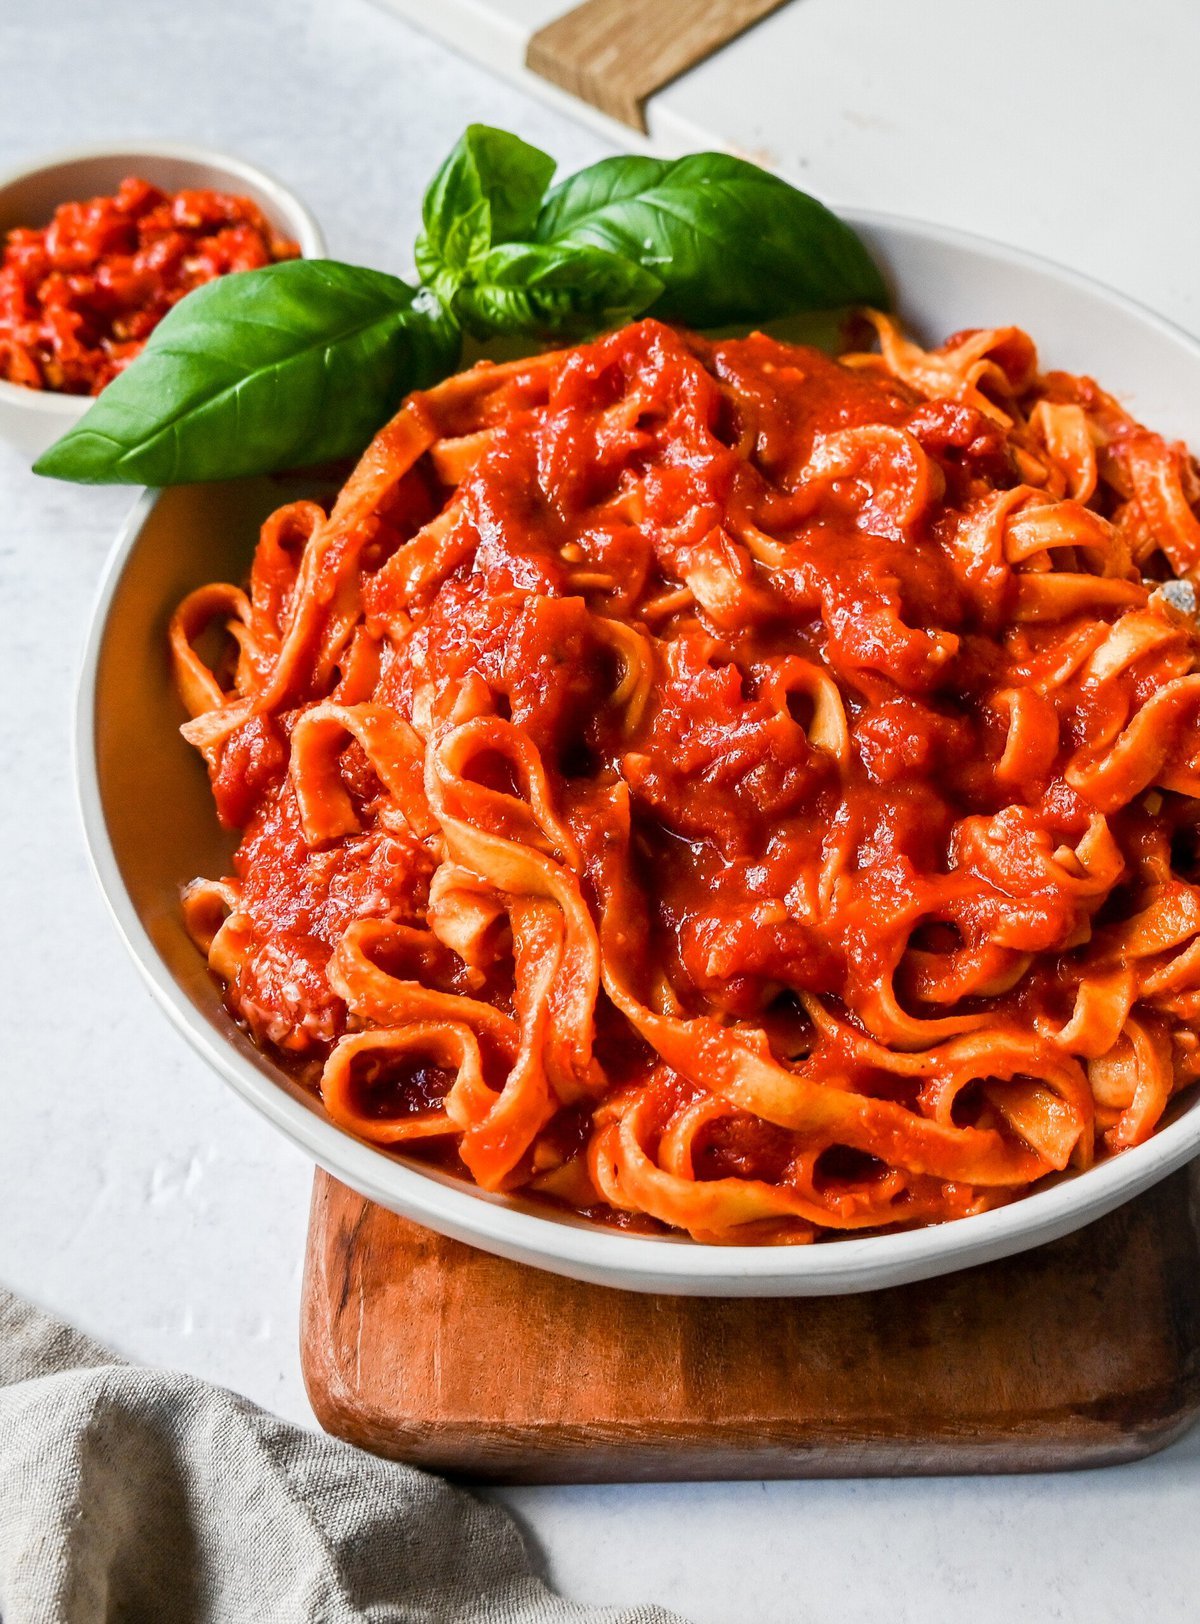 Mi Amor Spicy Pasta. This homemade spicy arrabbiata sauce is made with chopped calabrian chilies for the perfect amount of heat, tossed with fresh pasta and topped with Parmigiano Reggiano cheese and fresh basil. This is the perfect spicy pasta recipe!